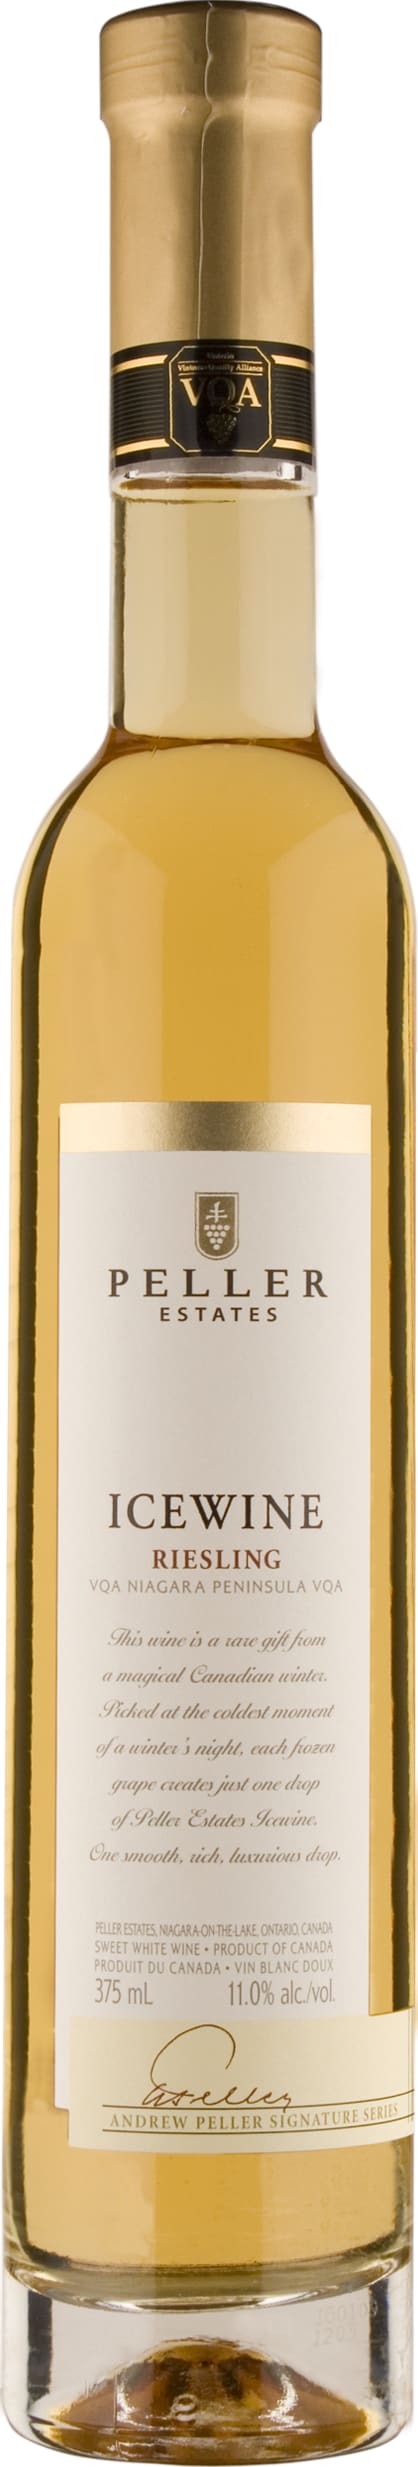 Peller Family Estates Riesling Icewine 375cl Gift Pack 2019 37.5cl - Buy Peller Family Estates Wines from GREAT WINES DIRECT wine shop